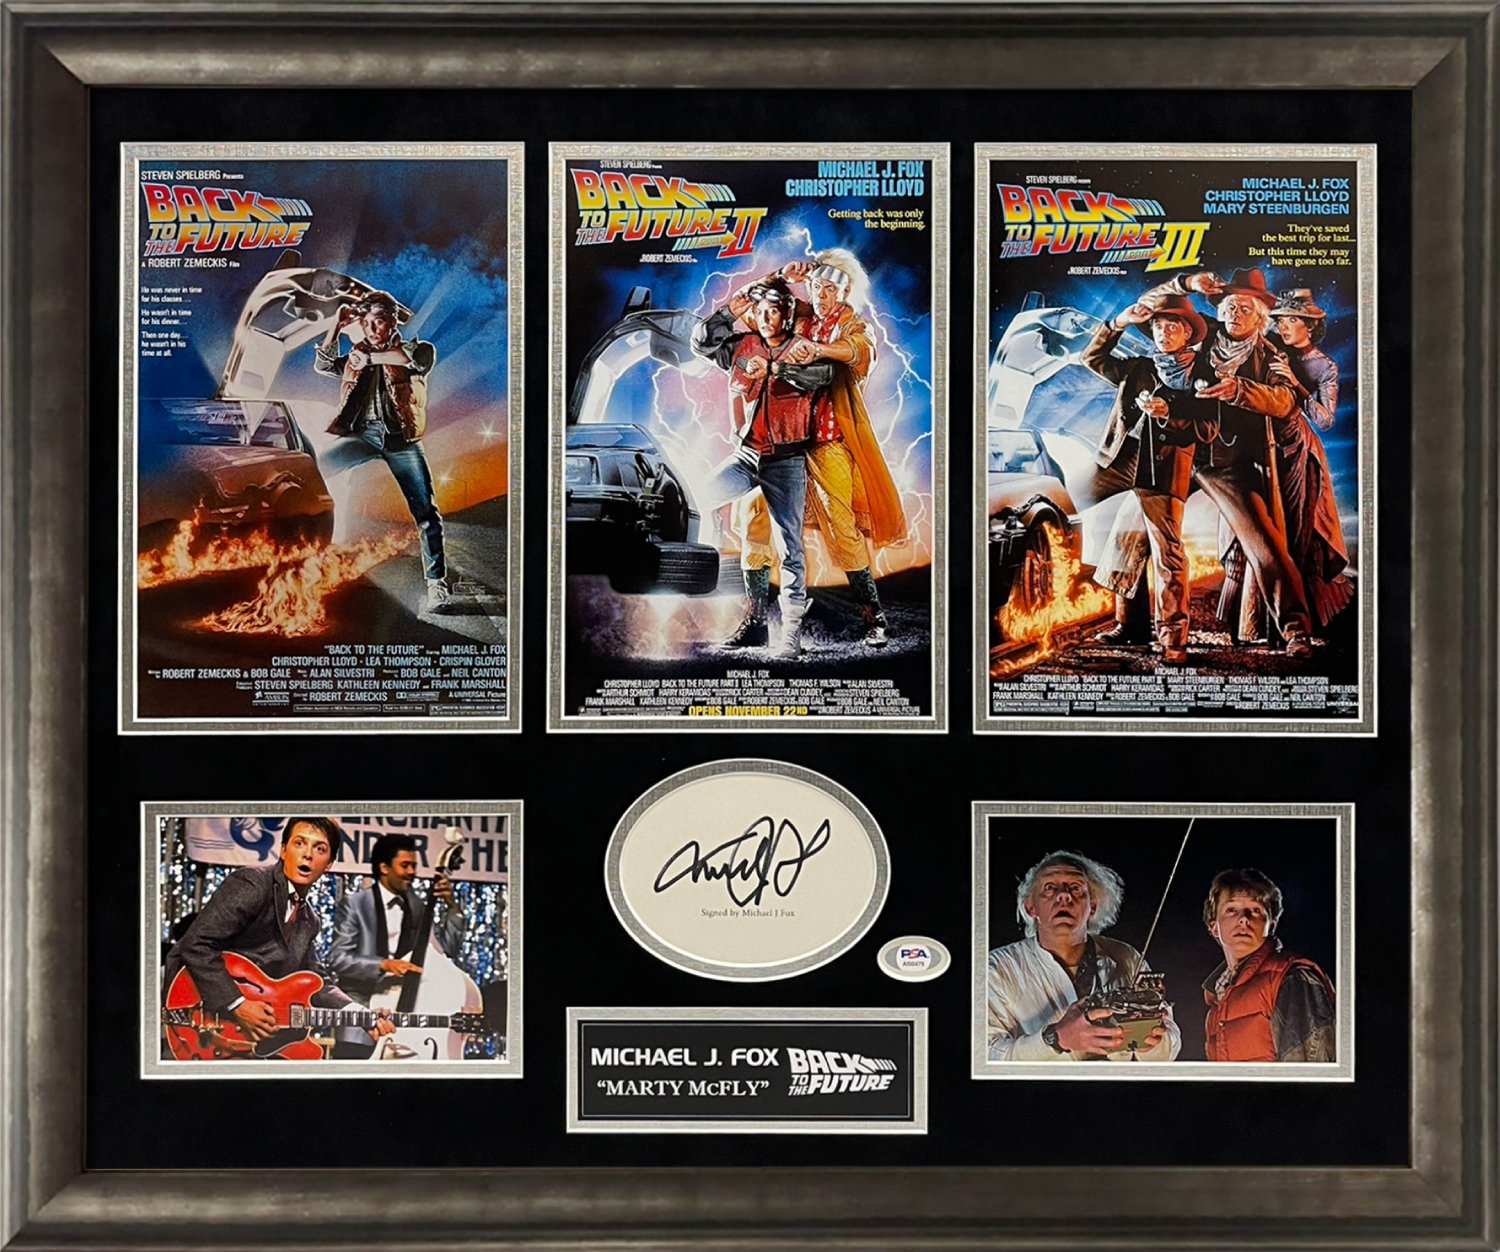 Michael J. Fox Autograph Back to The Future Collage 23x27 PSA/DNA  Authentication - New England Picture